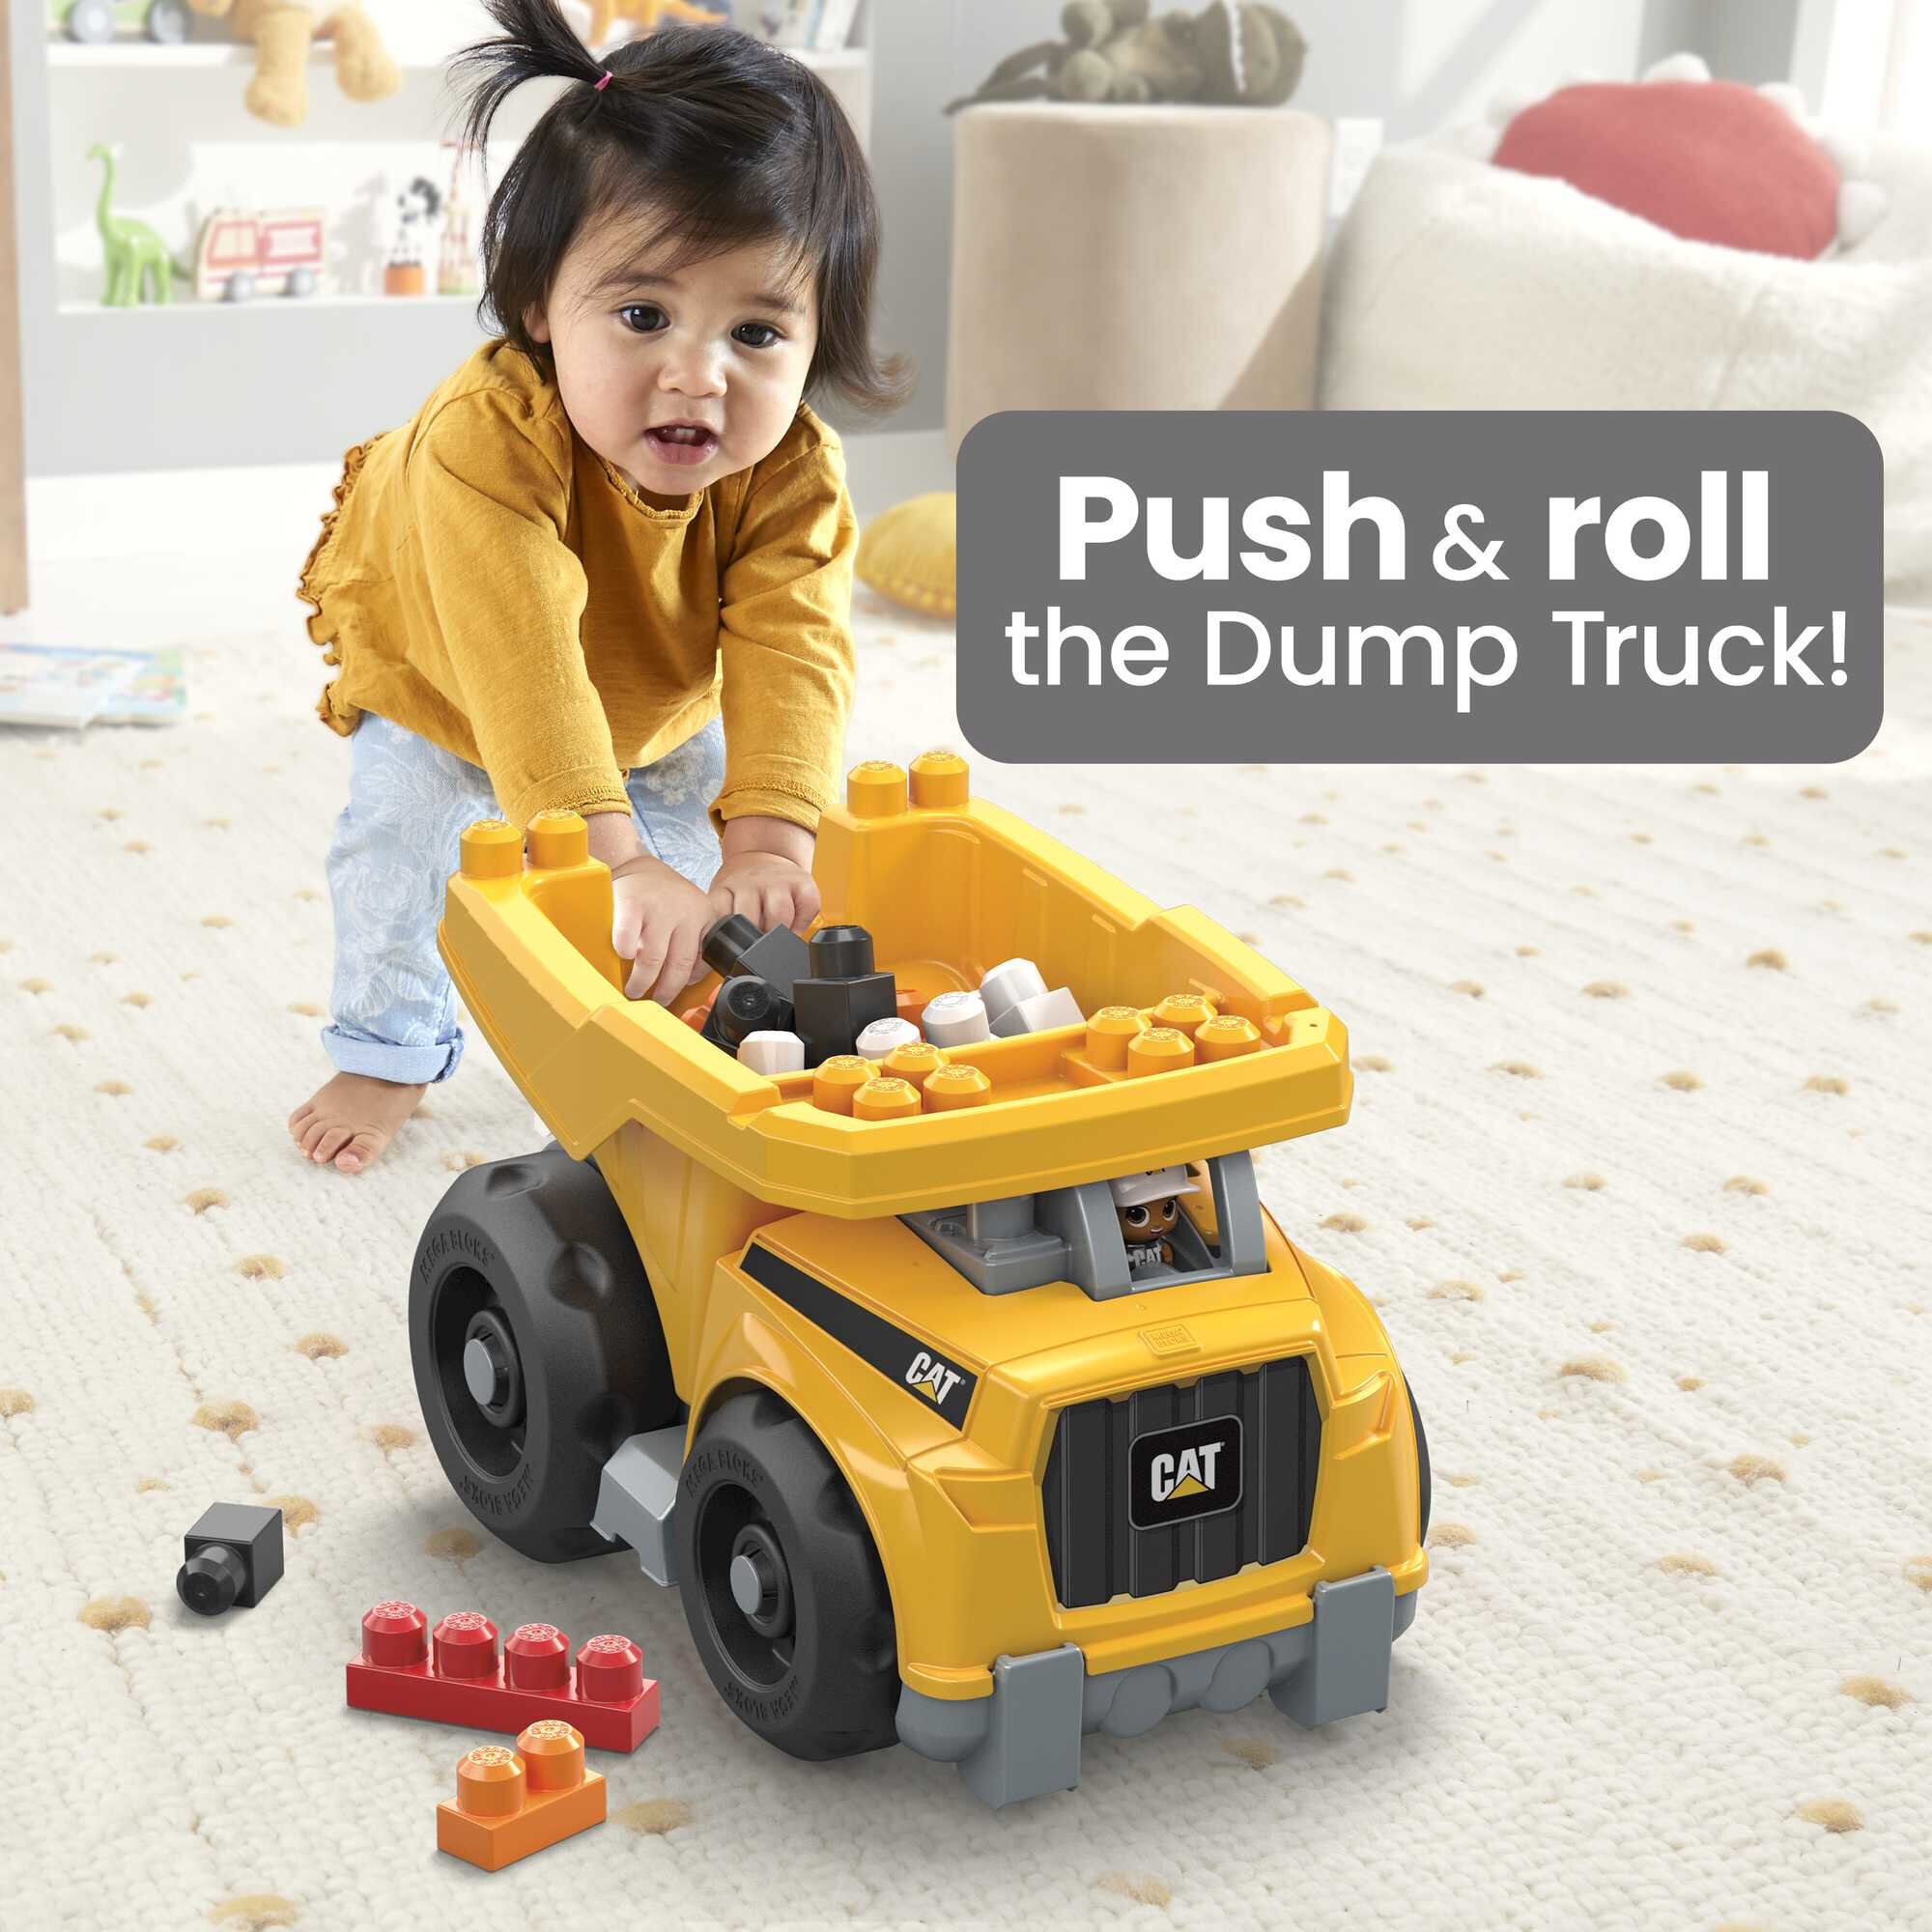 MEGA BLOKS Fisher-Price Building Toy Blocks Cat Large Dump Truck (25 Pieces) For Toddler - image 5 of 7